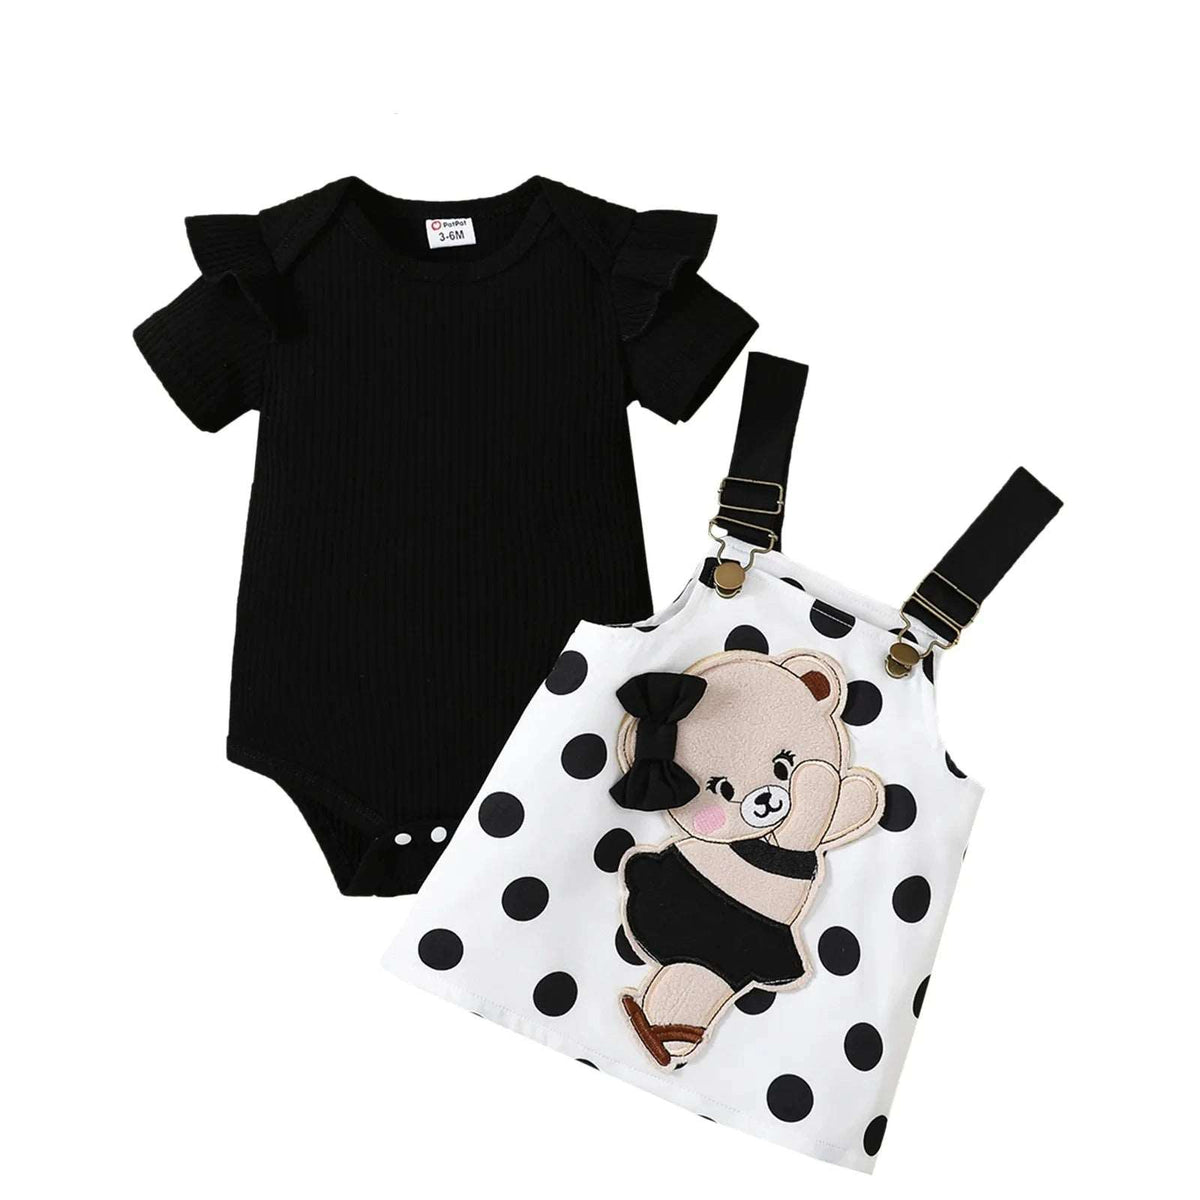 Baby Dresses with Ruffle and Polka Dot Graphic Bear - For all baby